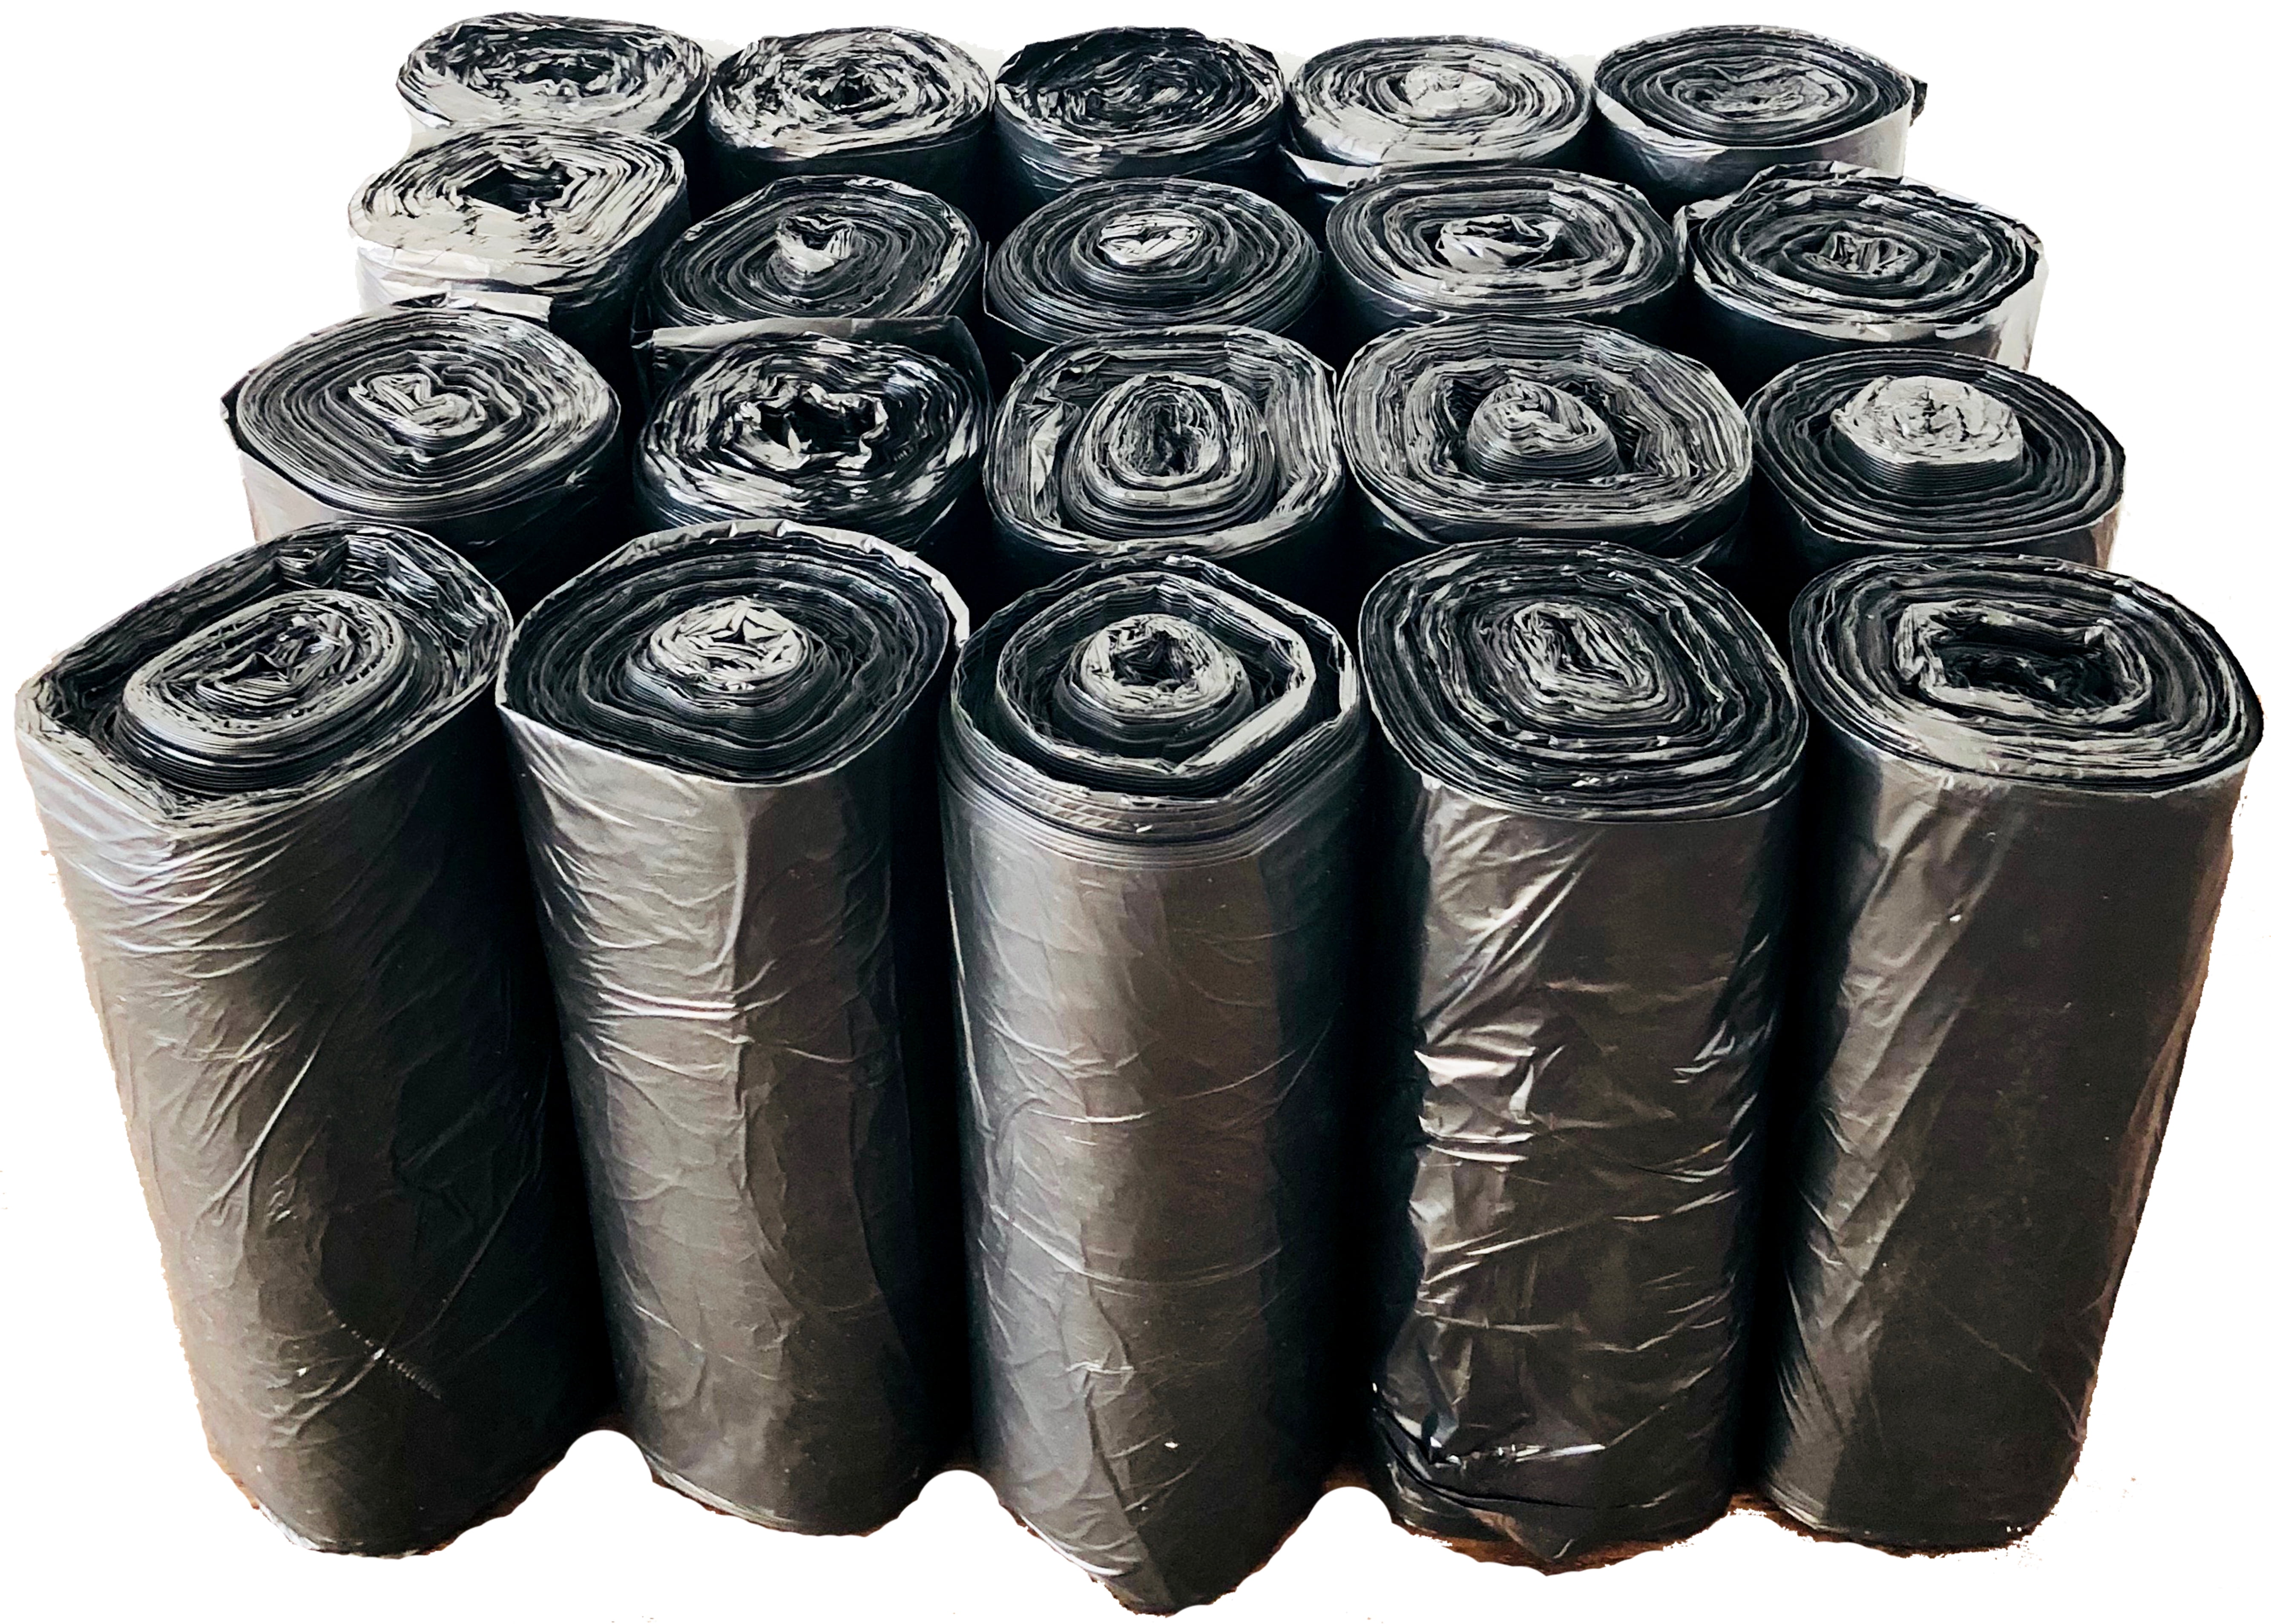 Trash Bags 13 Gallon Tall Kitchen Garbage Bags, Inwaysin Recycle Bags,  Biodegradable Black Trash Bags, 75ct